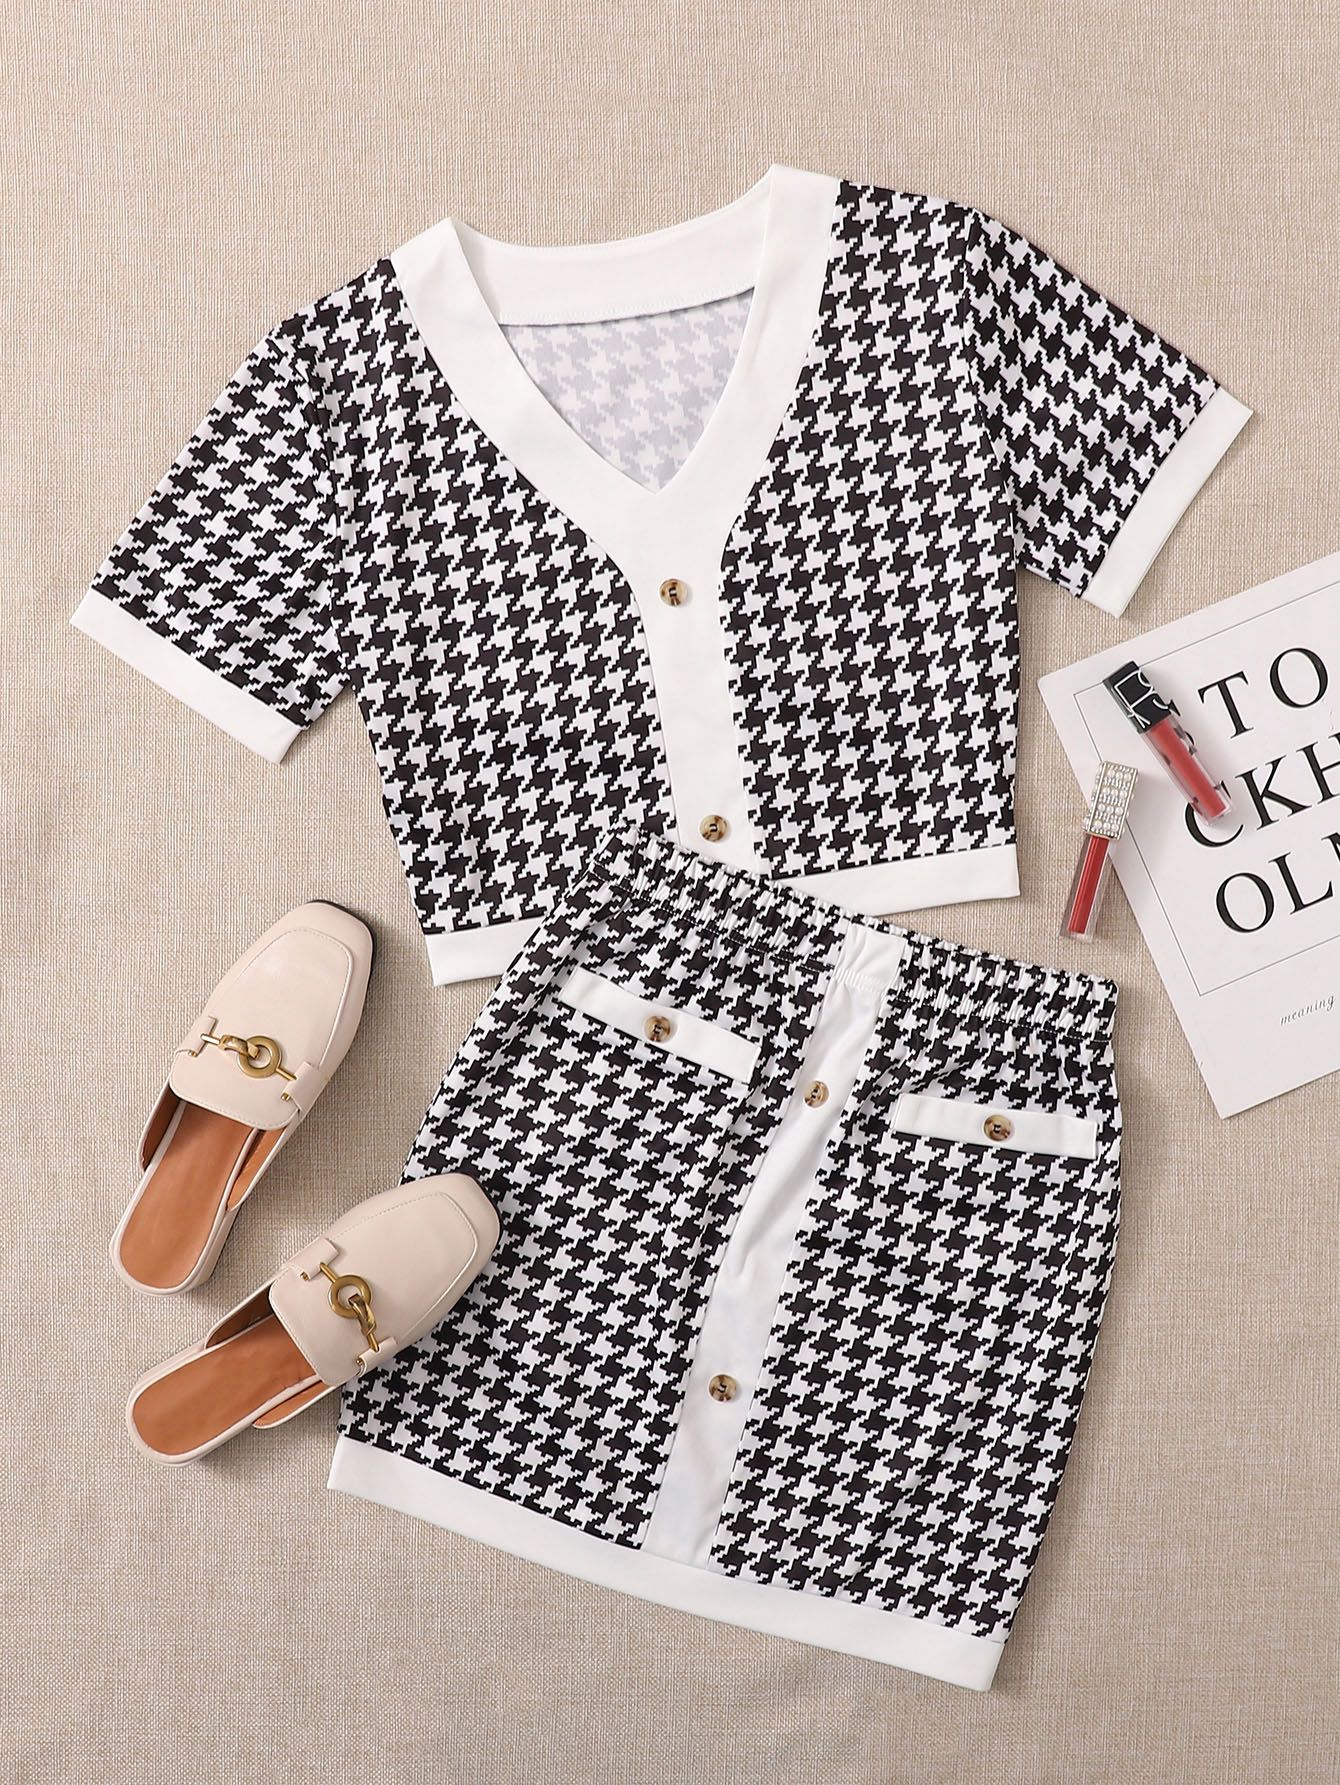 Plus Houndstooth Print Top With Skirt | SHEIN